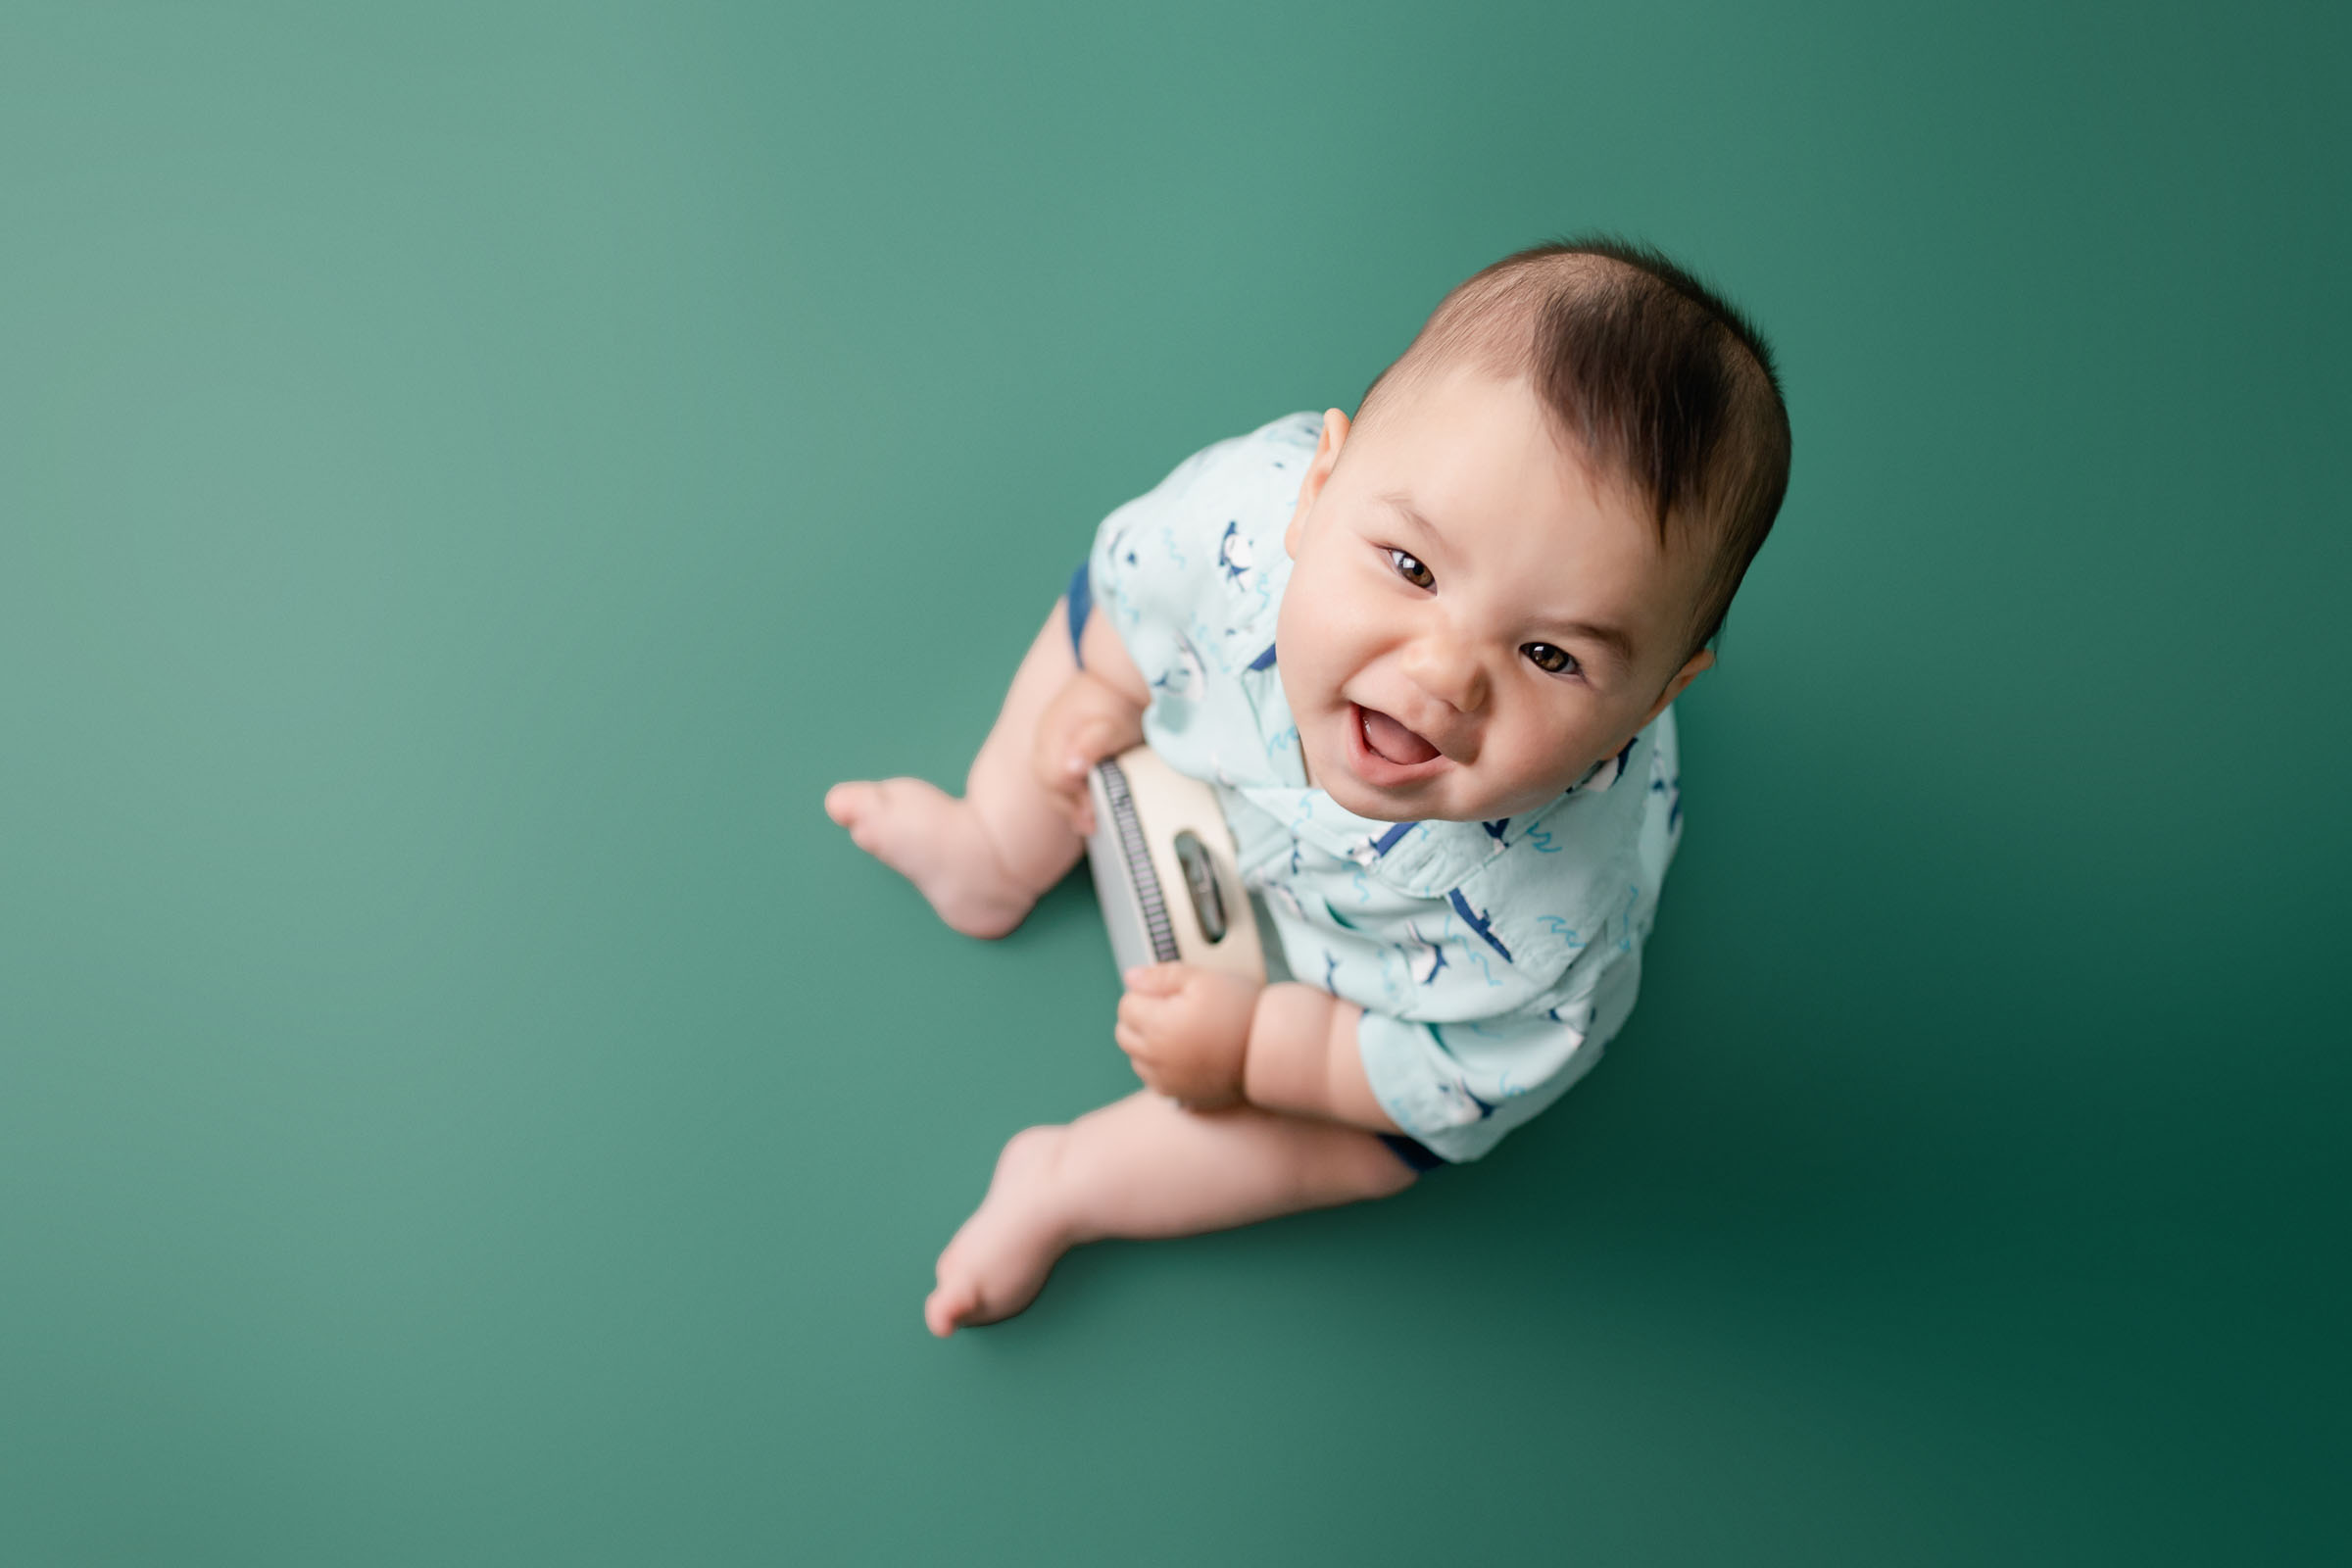 Super smiling baby boy sitting on green backdrop in blue shirt looking up at San Diego Baby Photographer